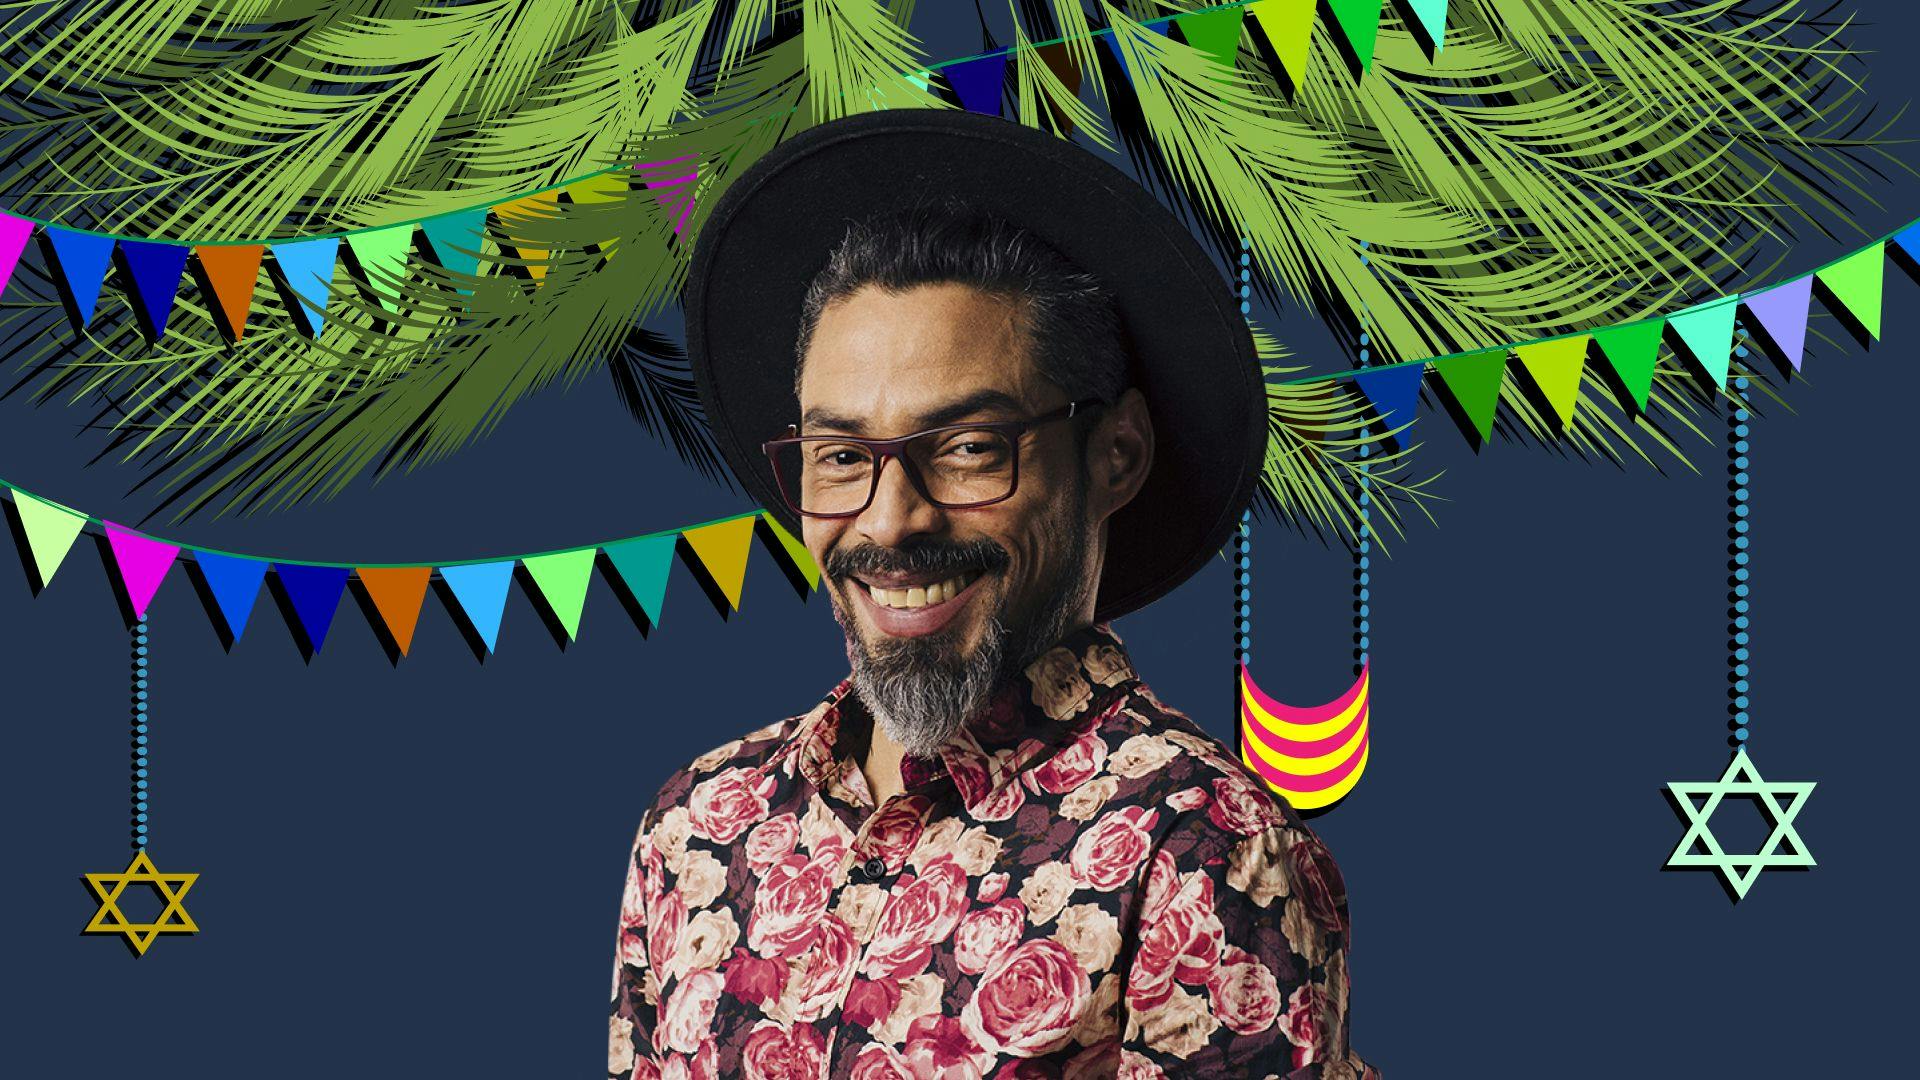 Smiling man with glasses against Sukkot background with flags, stars of David, and plant materials